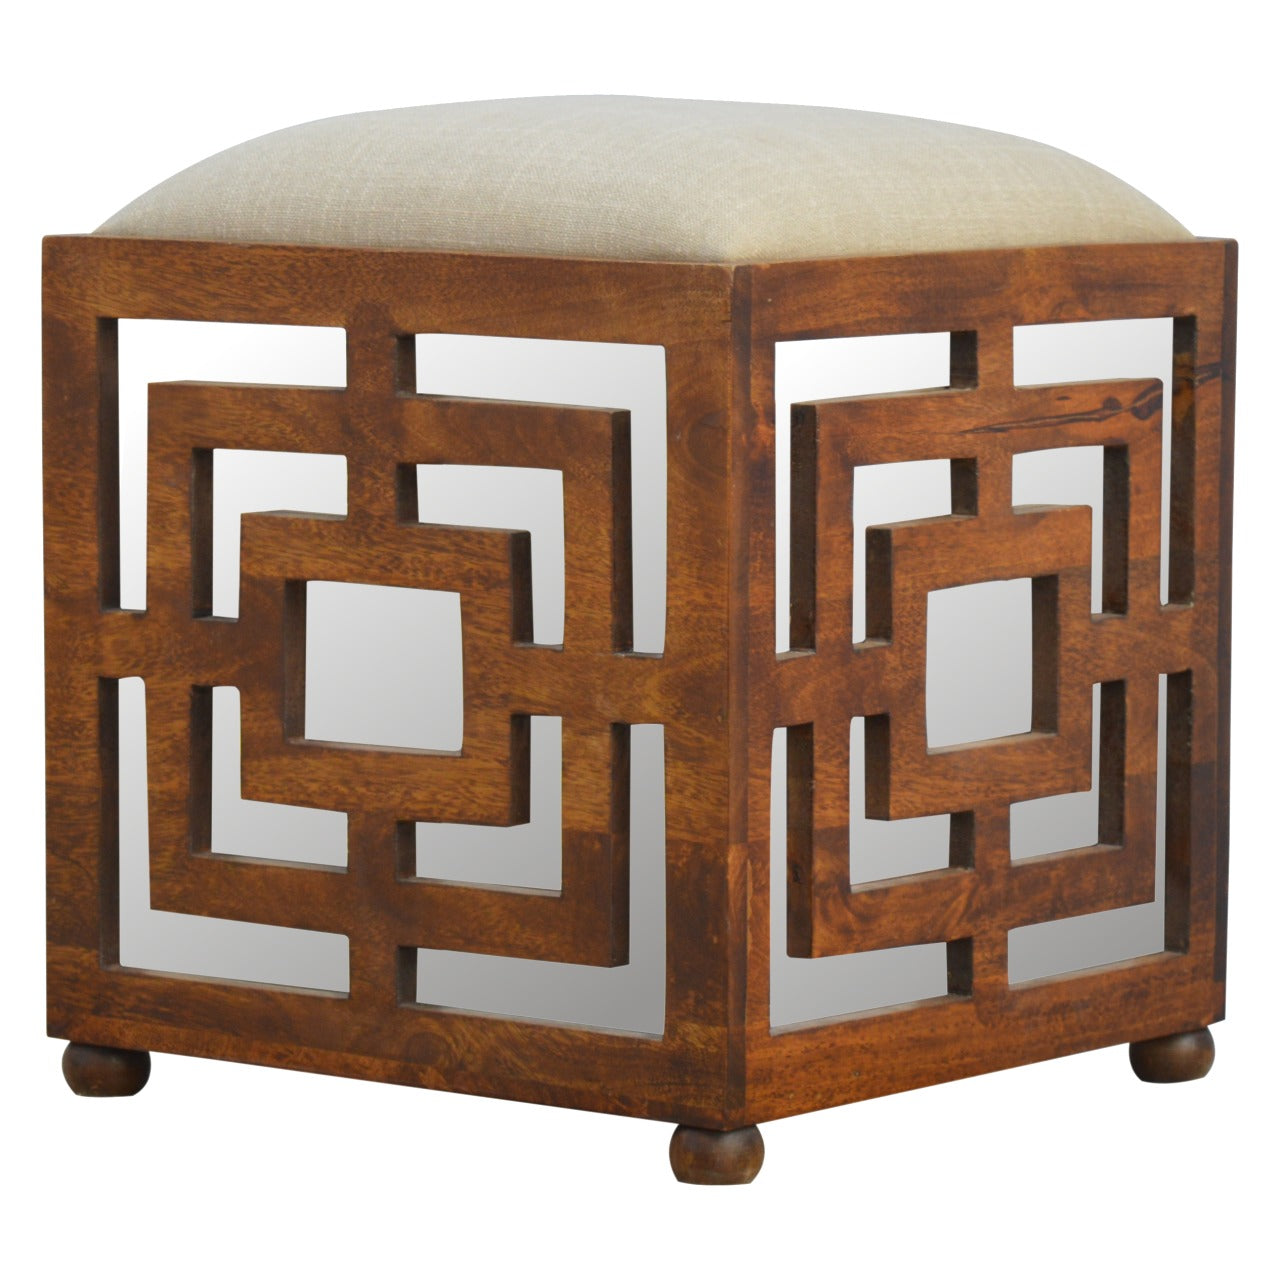 View Carved Linen Seat Footstool information